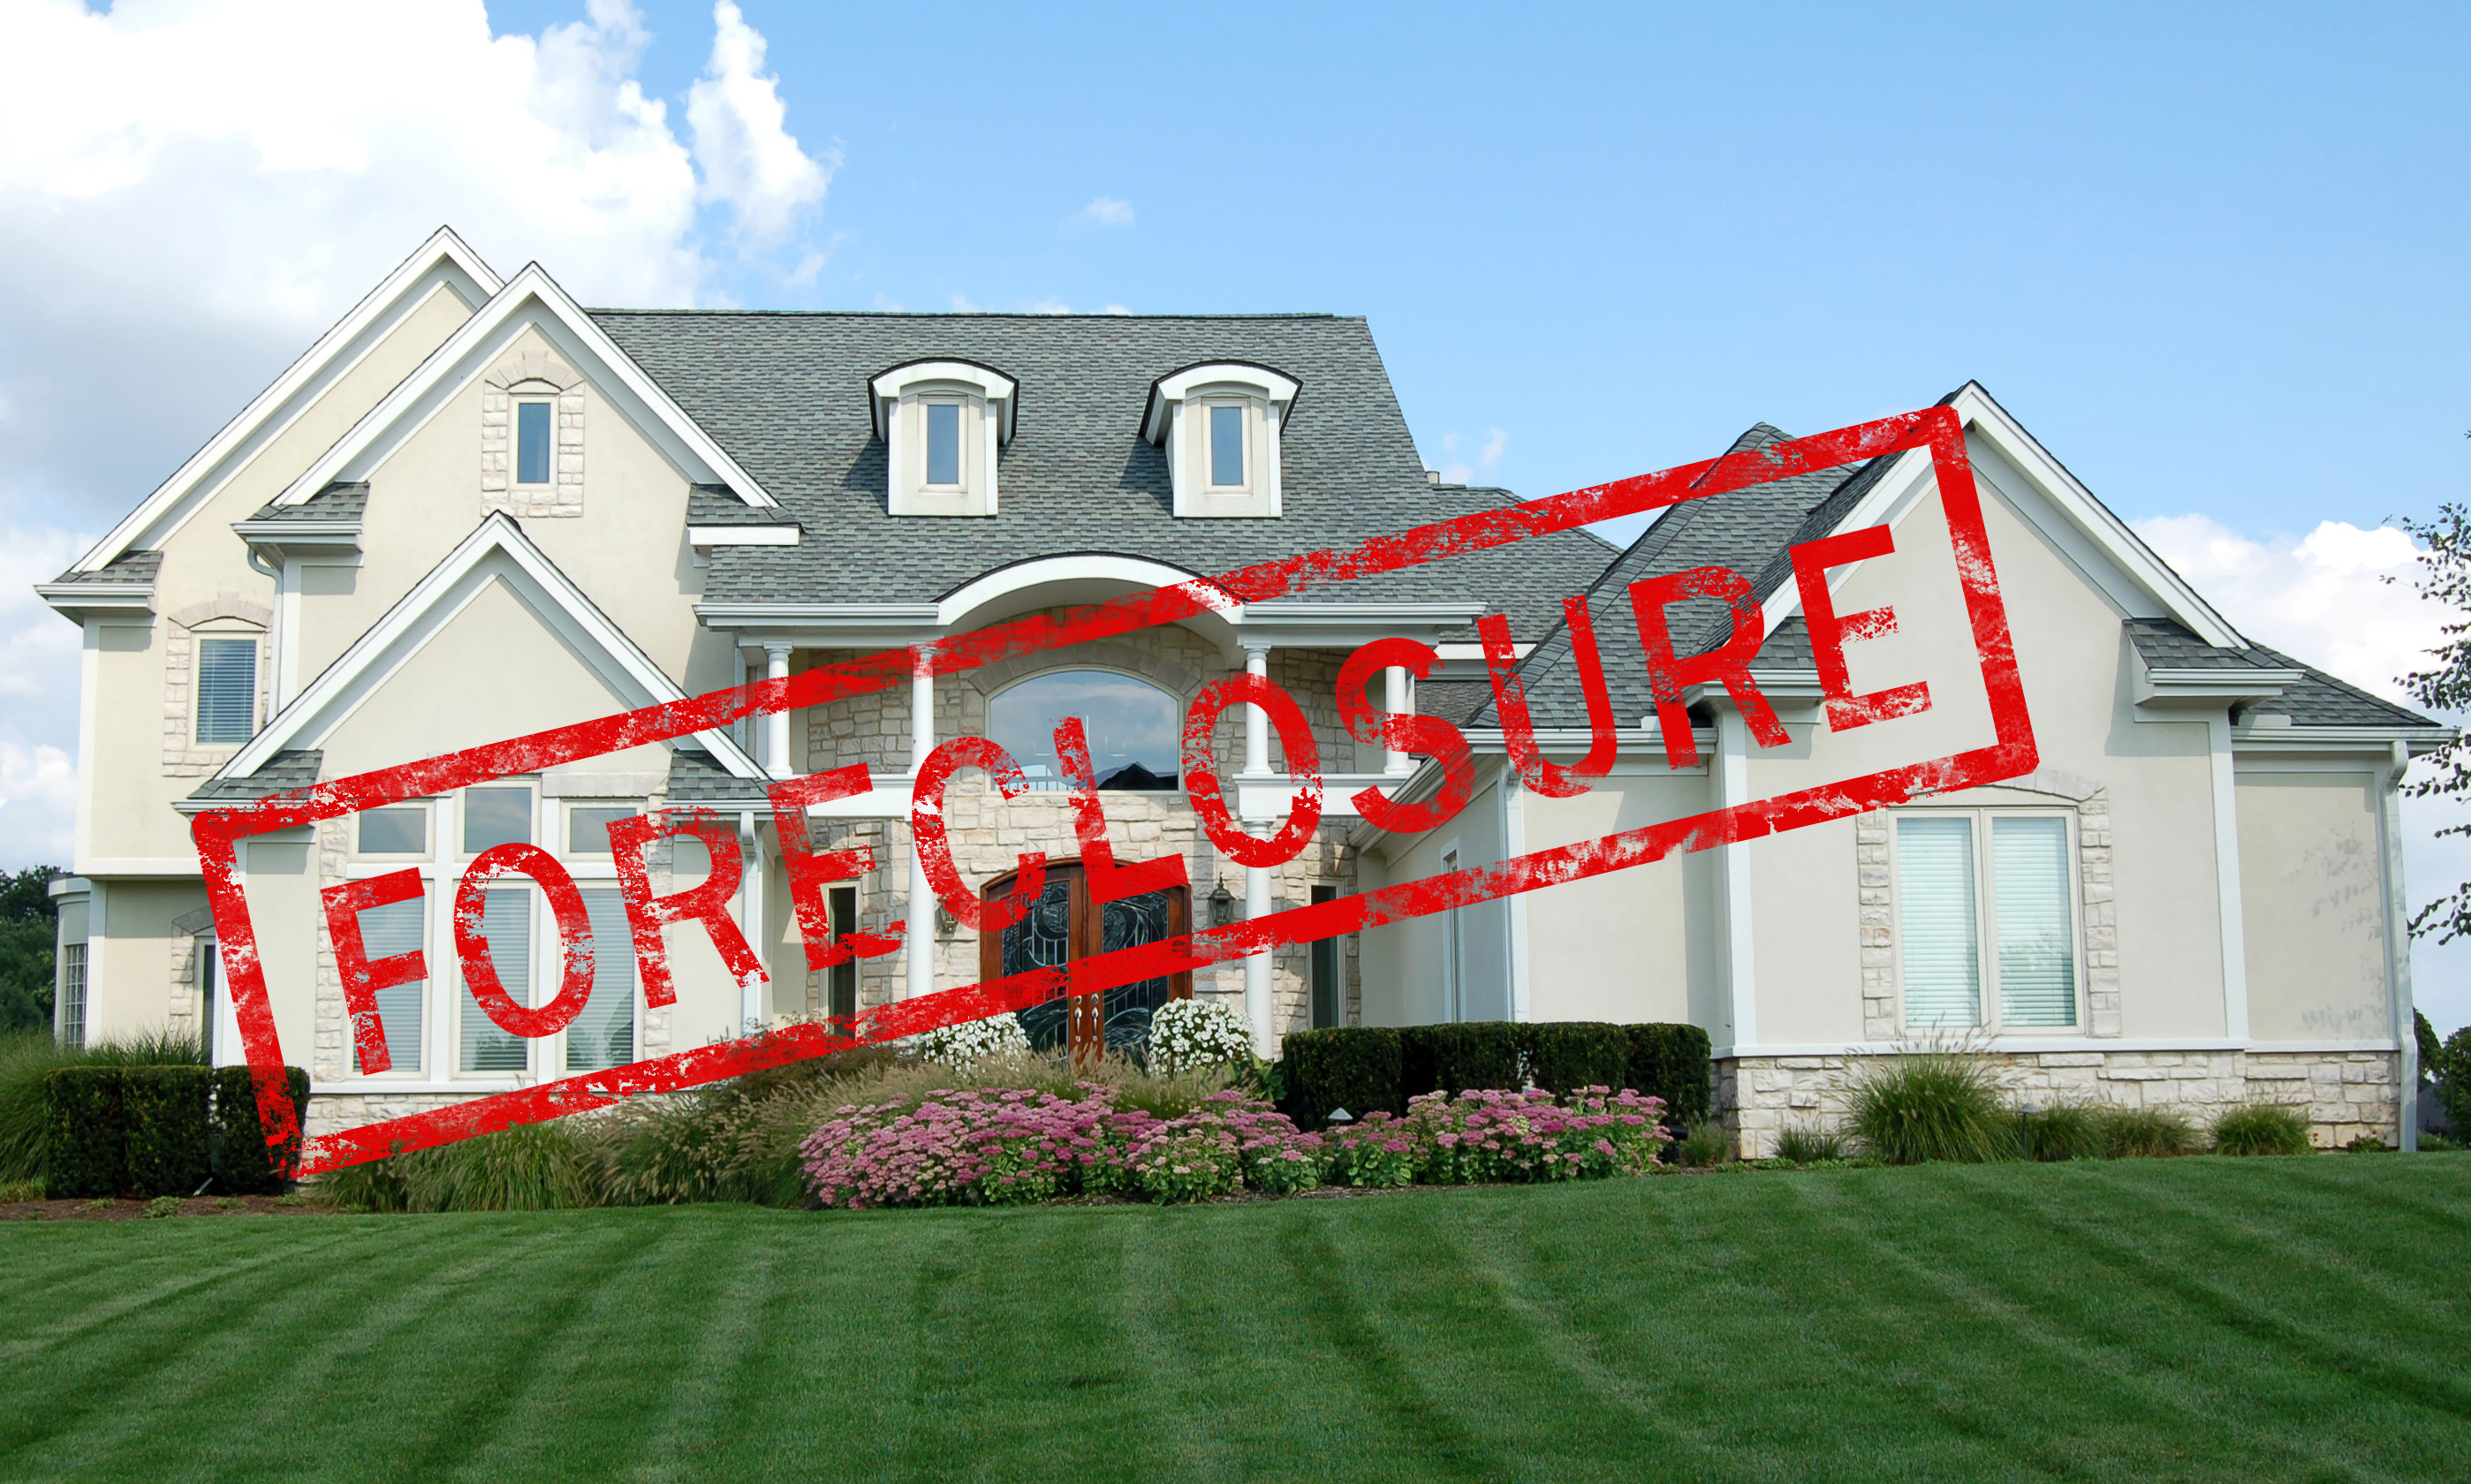 Call Maven Appraisal Services when you need valuations on Maricopa foreclosures